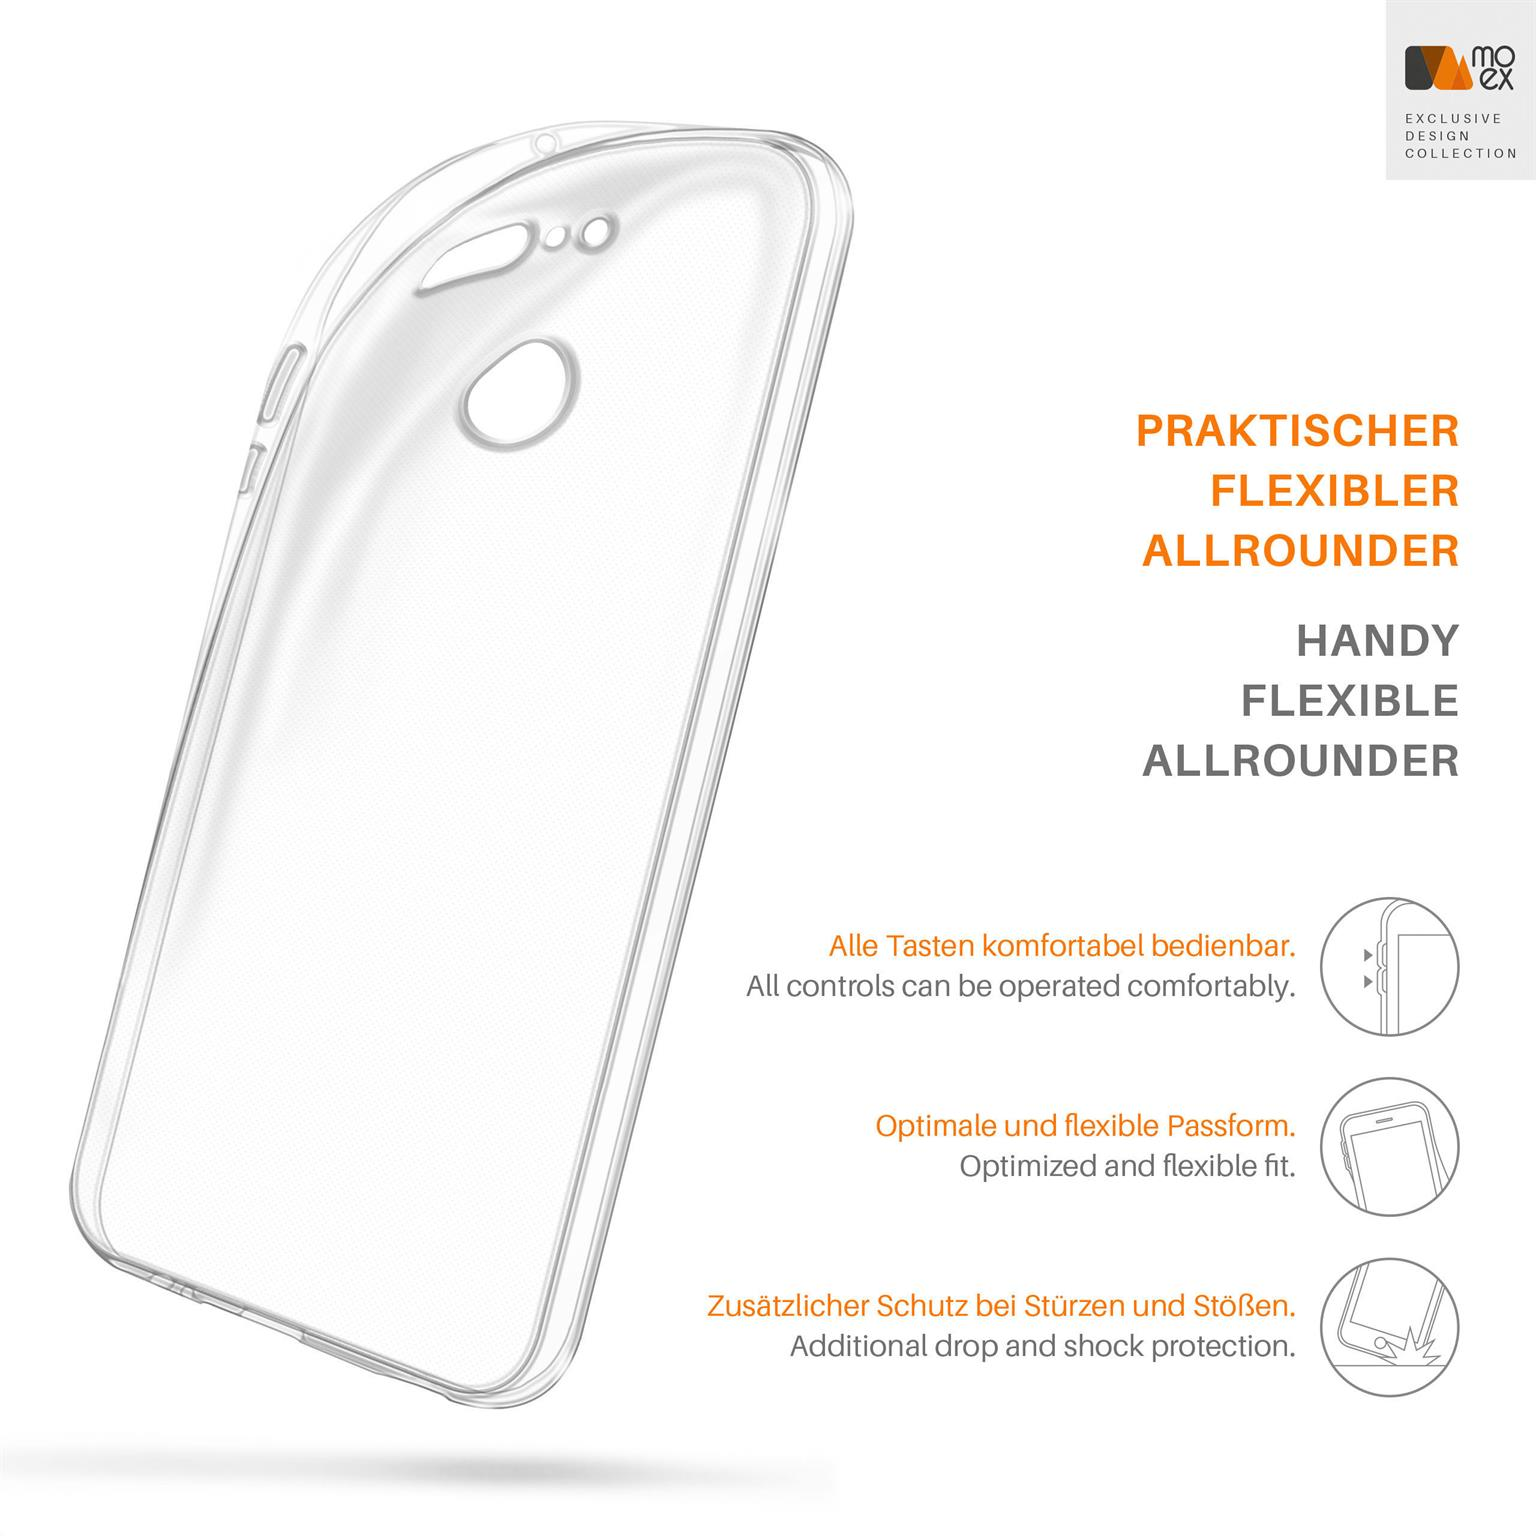 Backcover, 9 MOEX Crystal-Clear Lite, Huawei, Honor Aero Case,